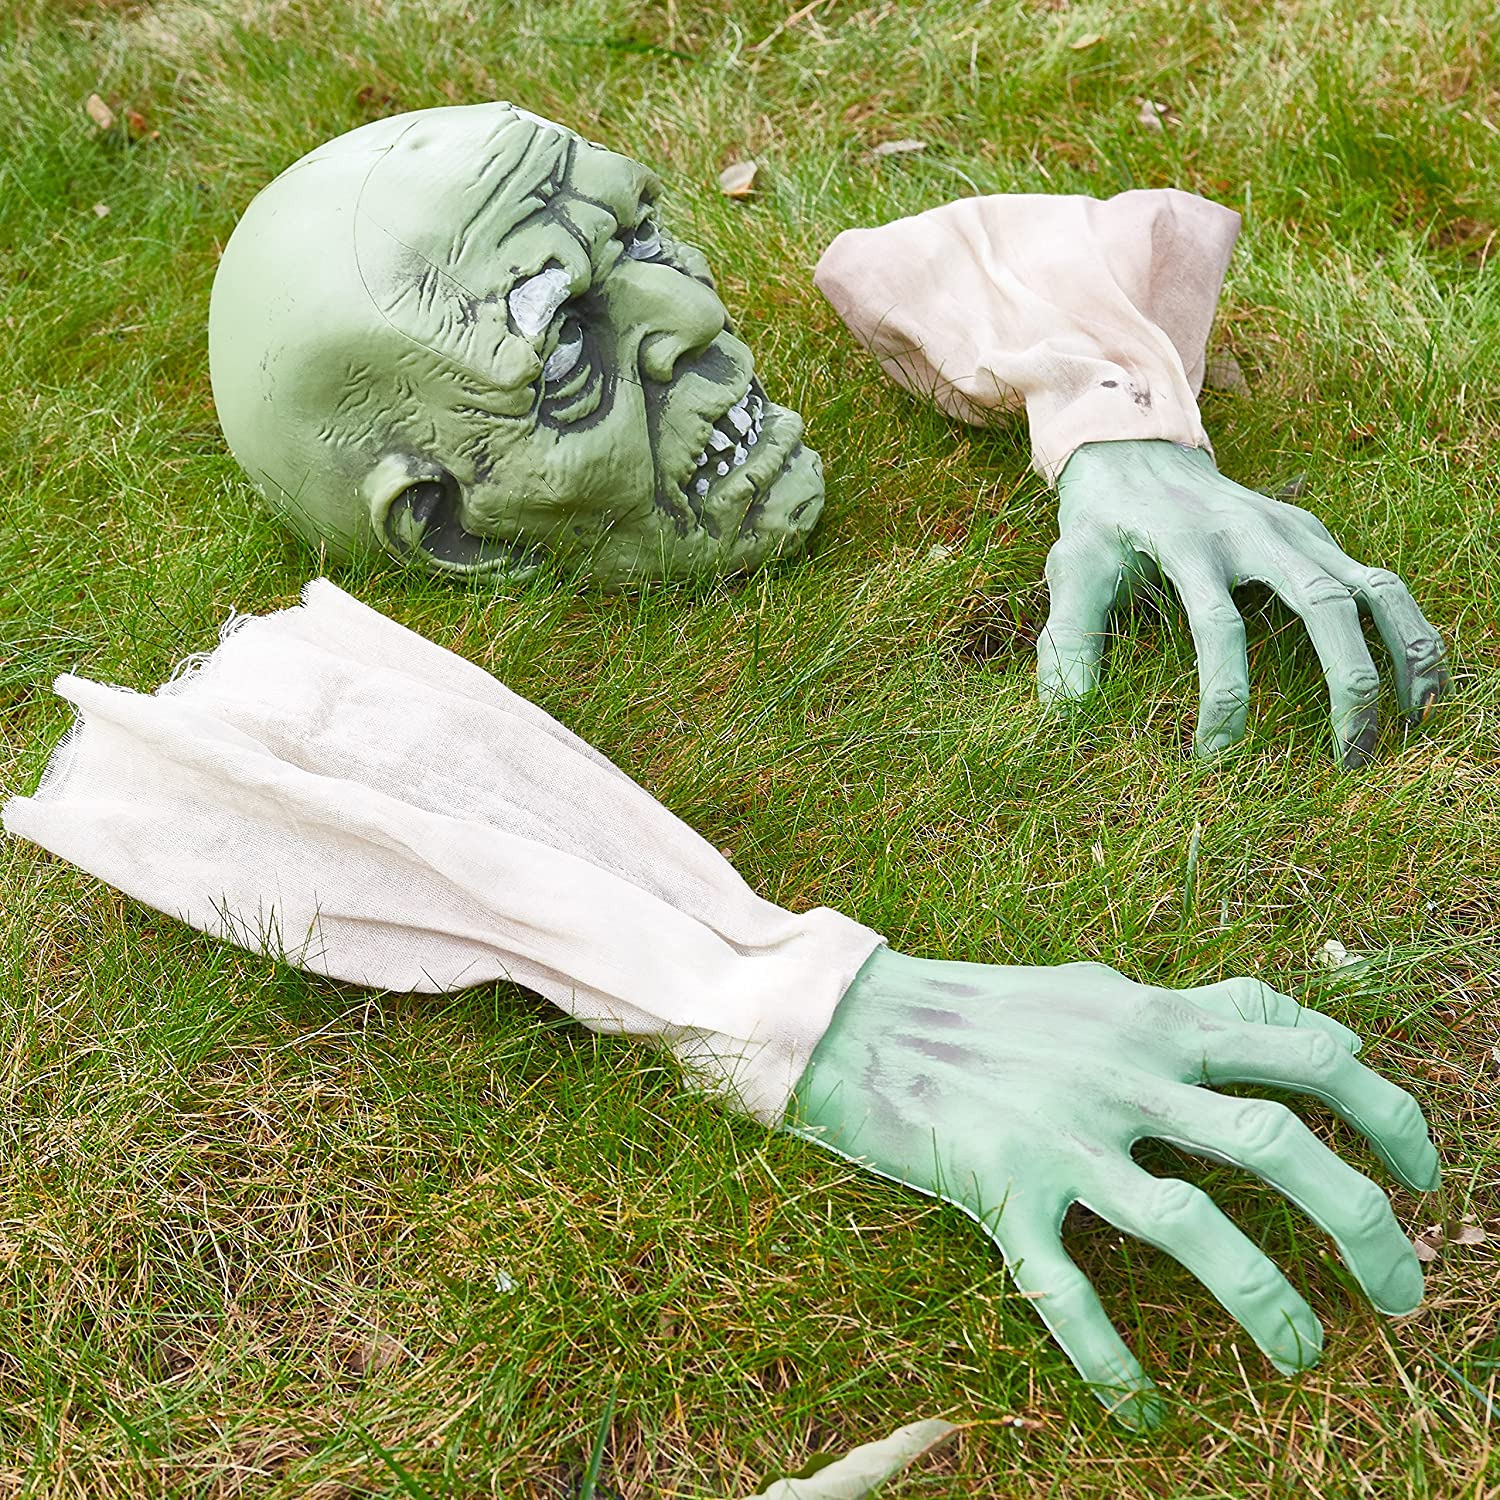 Halloween Zombie Face & Arms Lawn Stakes Groundbreaker Decoration - the Best Out